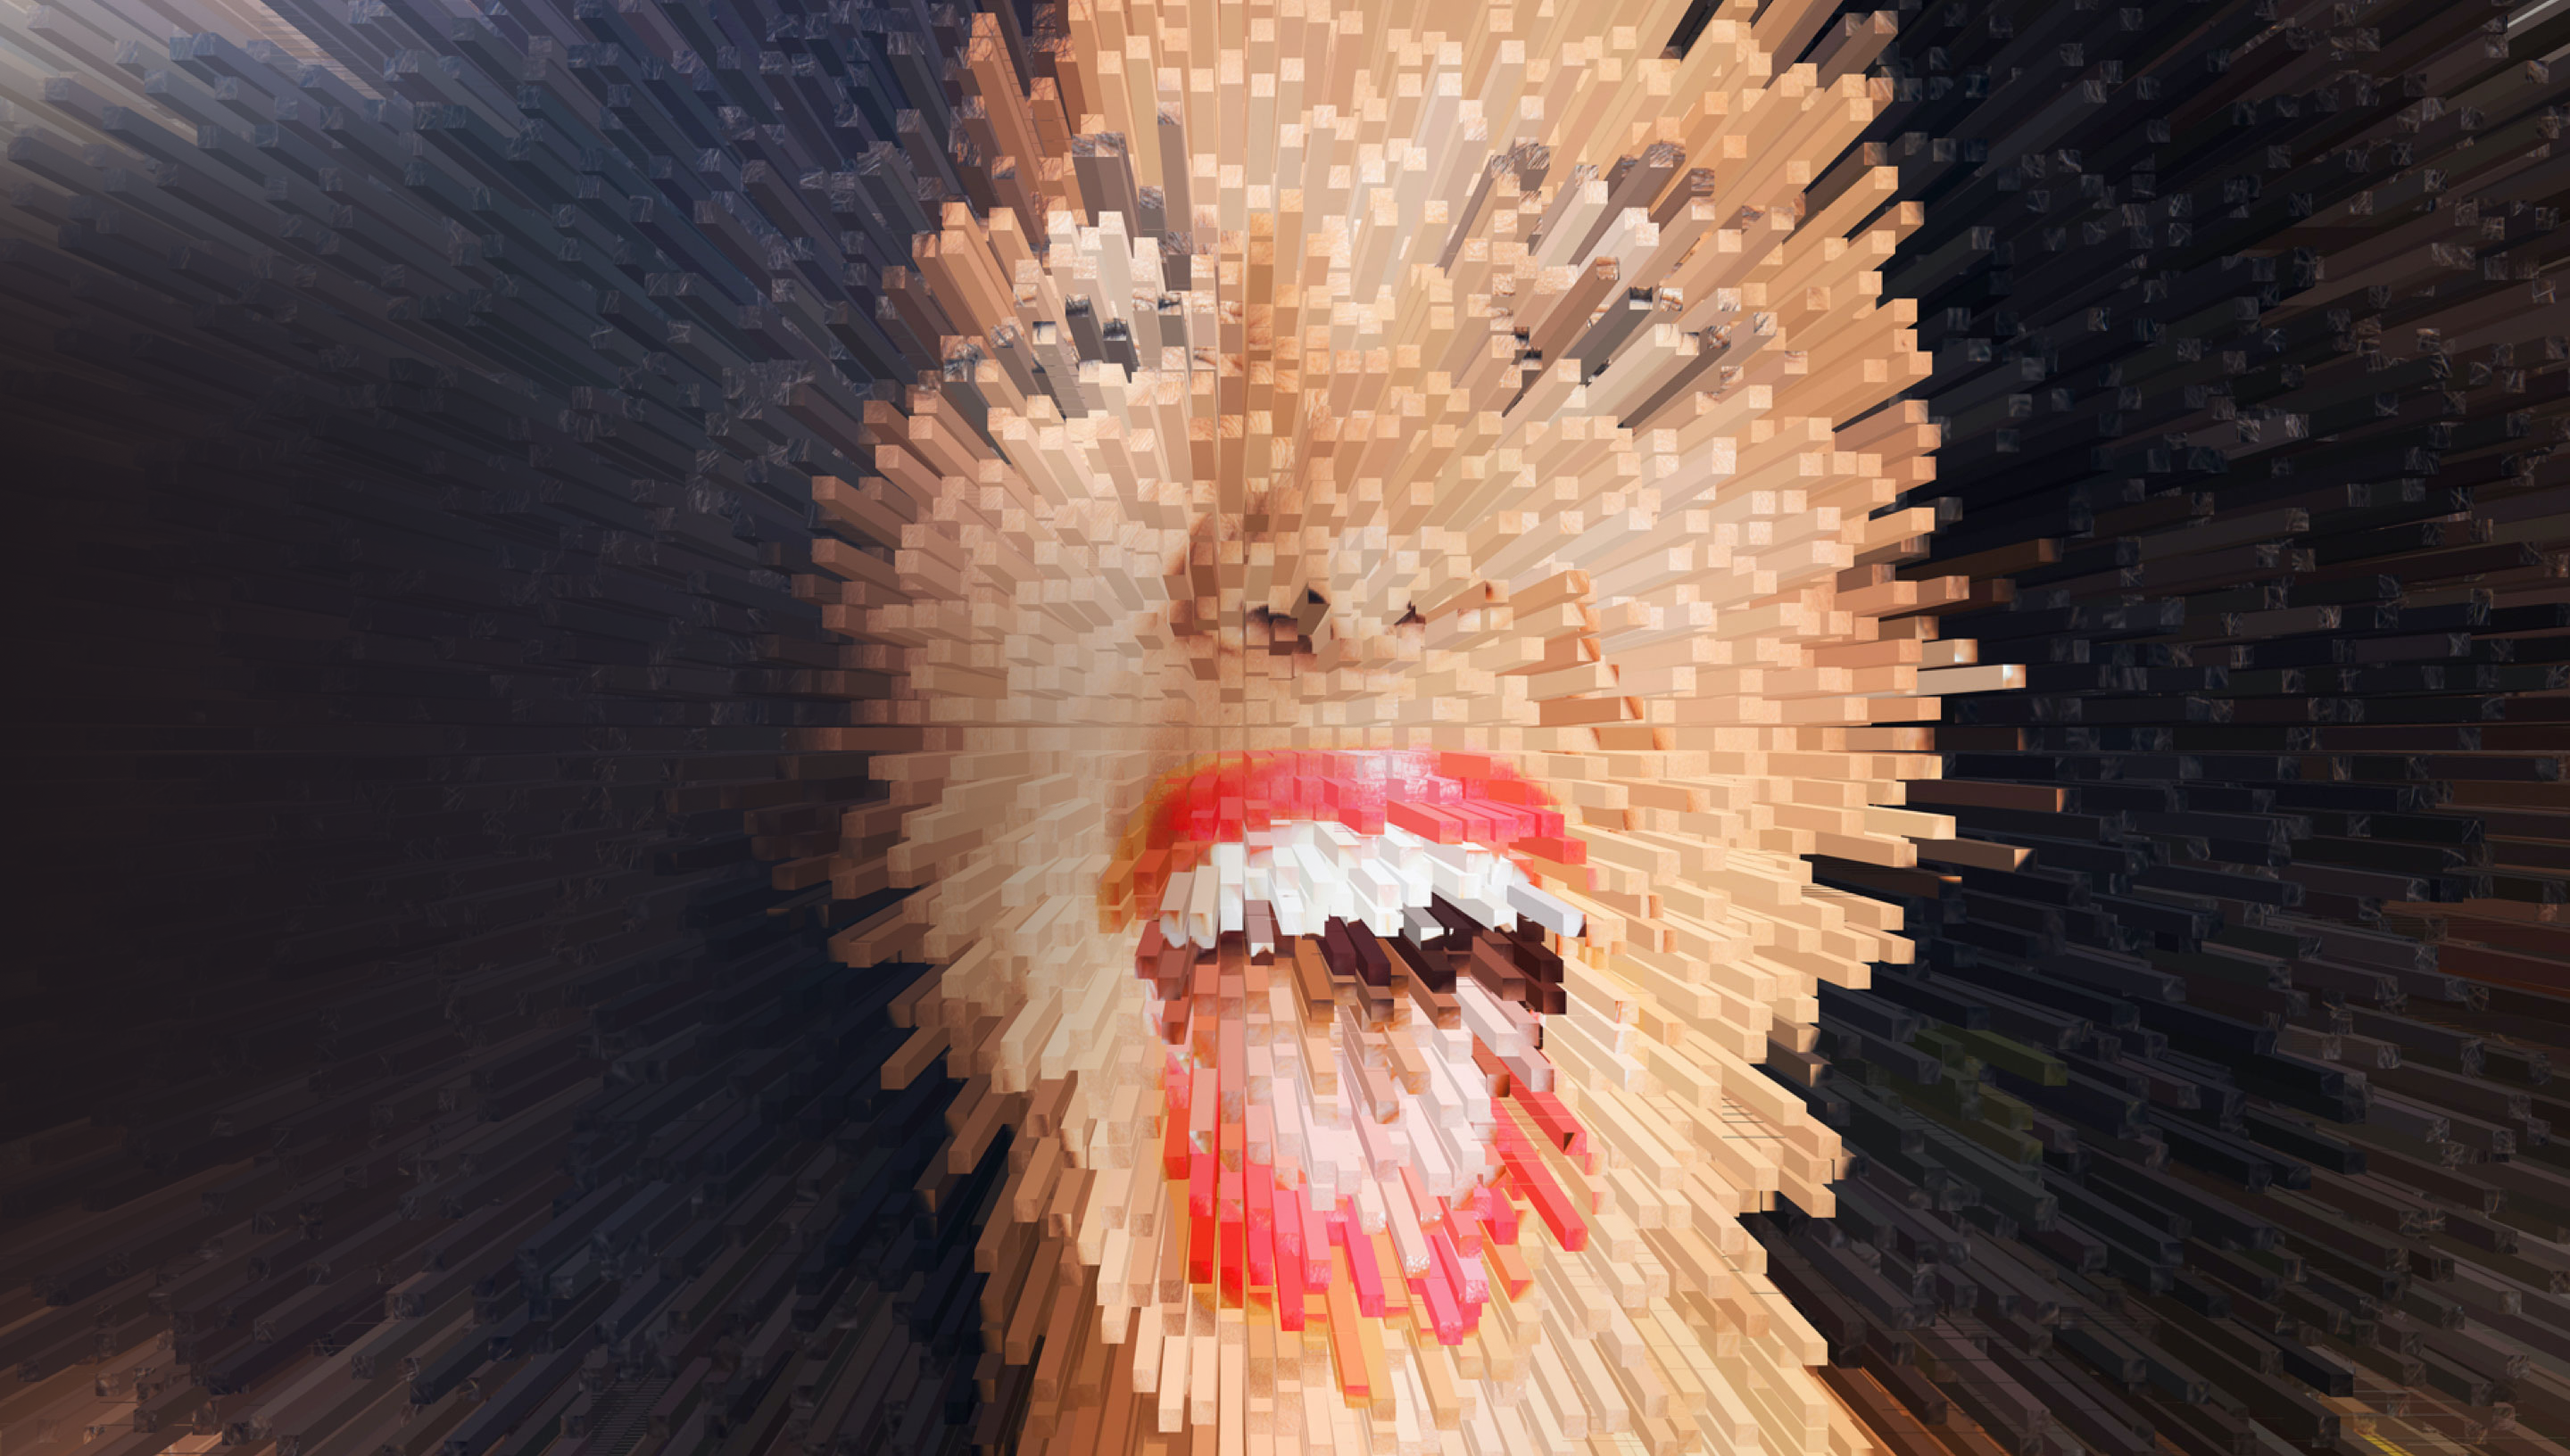 Pixelated image of a person’s face expressing movement and expansion